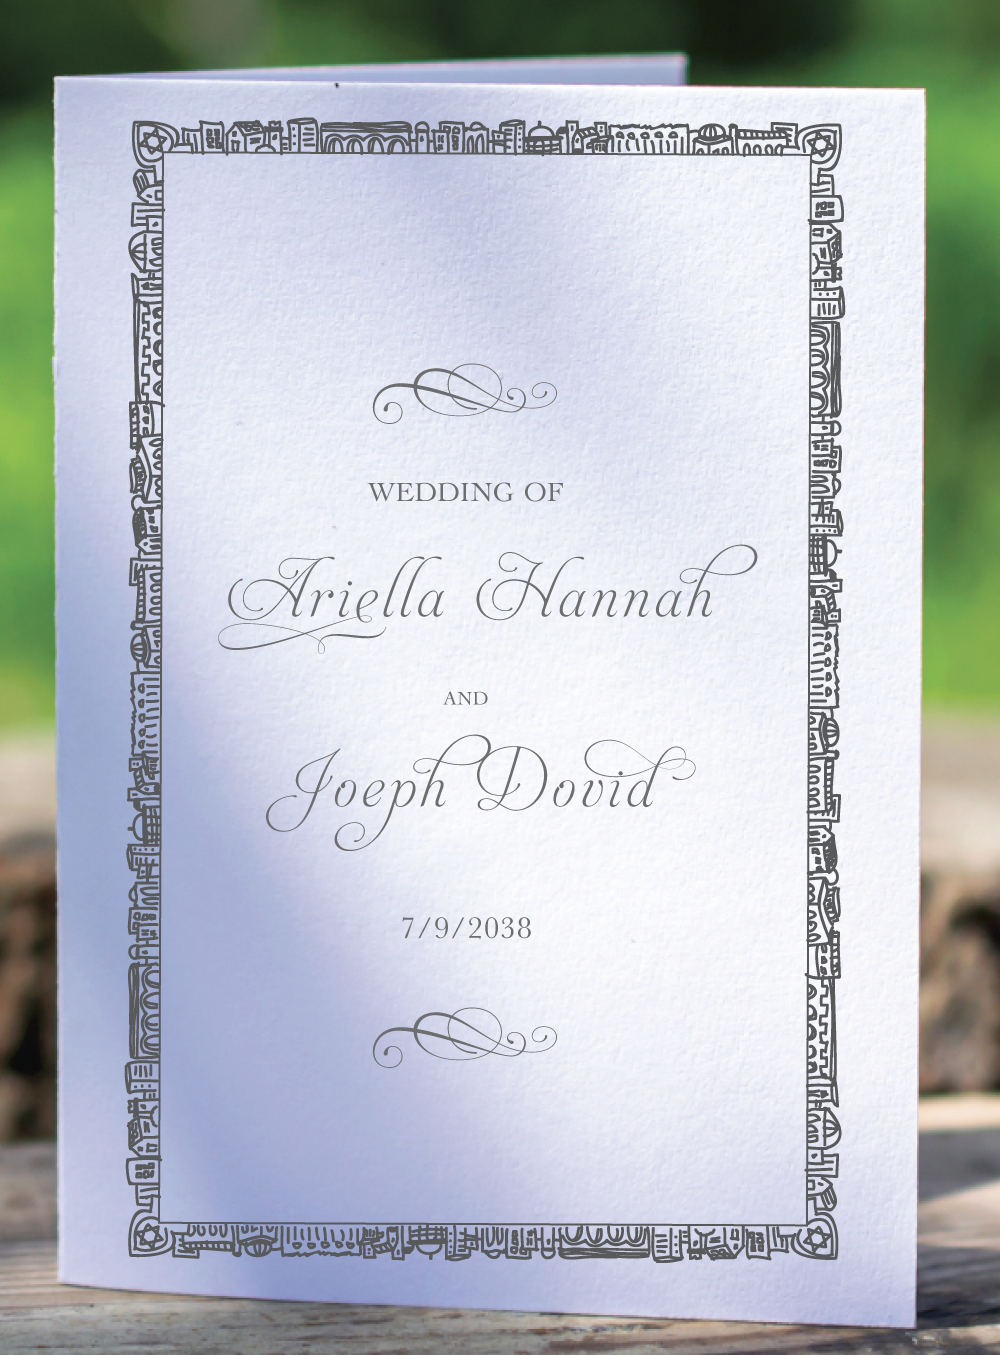 Your customized Jewish Wedding Programs will set your ceremony tone with flair and function. Our traditional open-book style will keep the wedding details organized and easy to follow for your guests. The four-page wedding program will incorporate your invitation design and wedding details explanation: The Wedding Party, In Loving Memory, Ketubah, Bedeken, Chuppah, Circling, Kiddushin, Sheva Brachot, The Breaking of the Glass and the Chuppah.